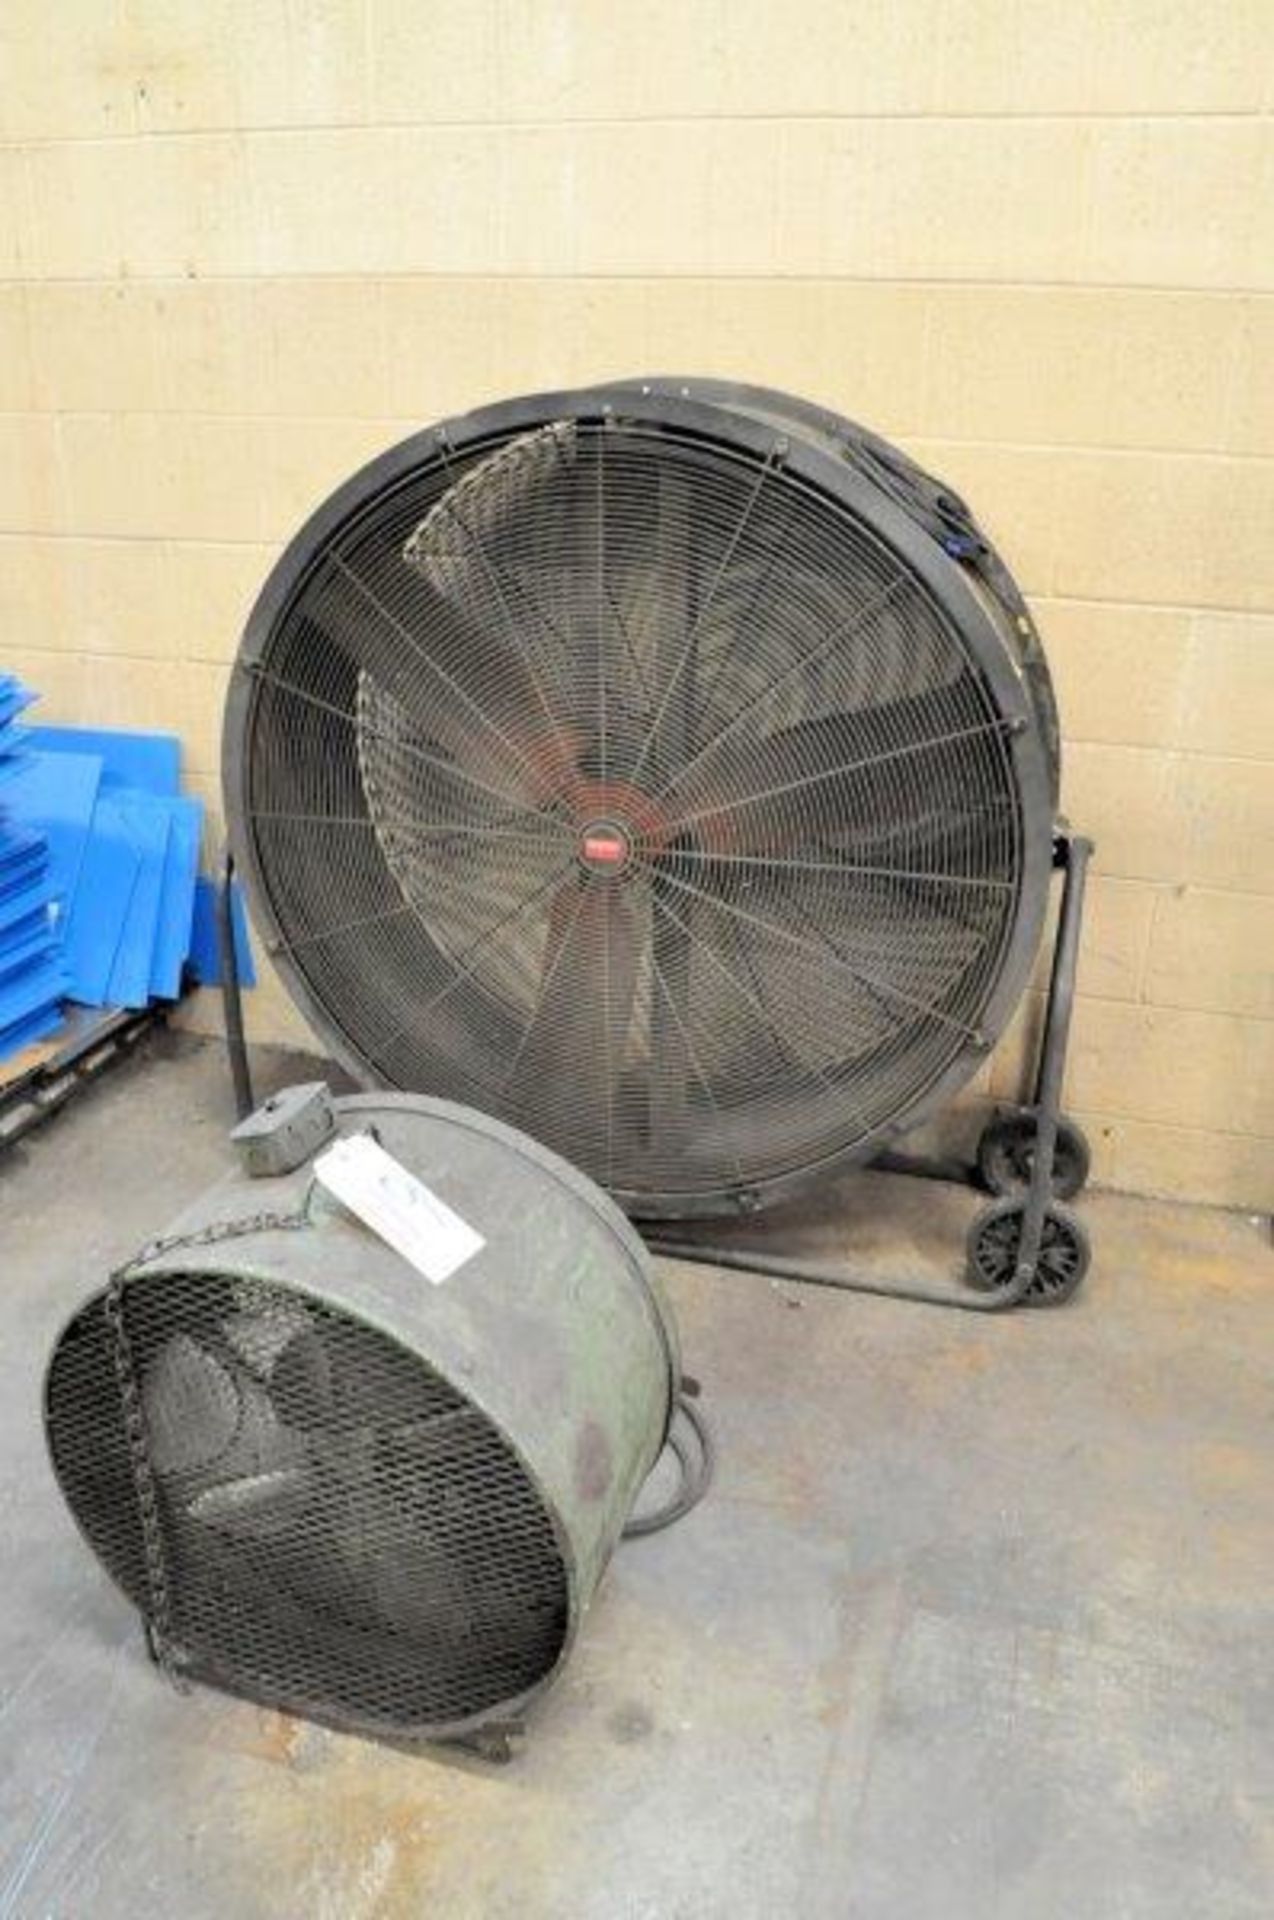 Lot-(1) Dayton 40" and (1) No Name 18" Portable Drum Fans, (Metal Fab Room) - Image 2 of 2